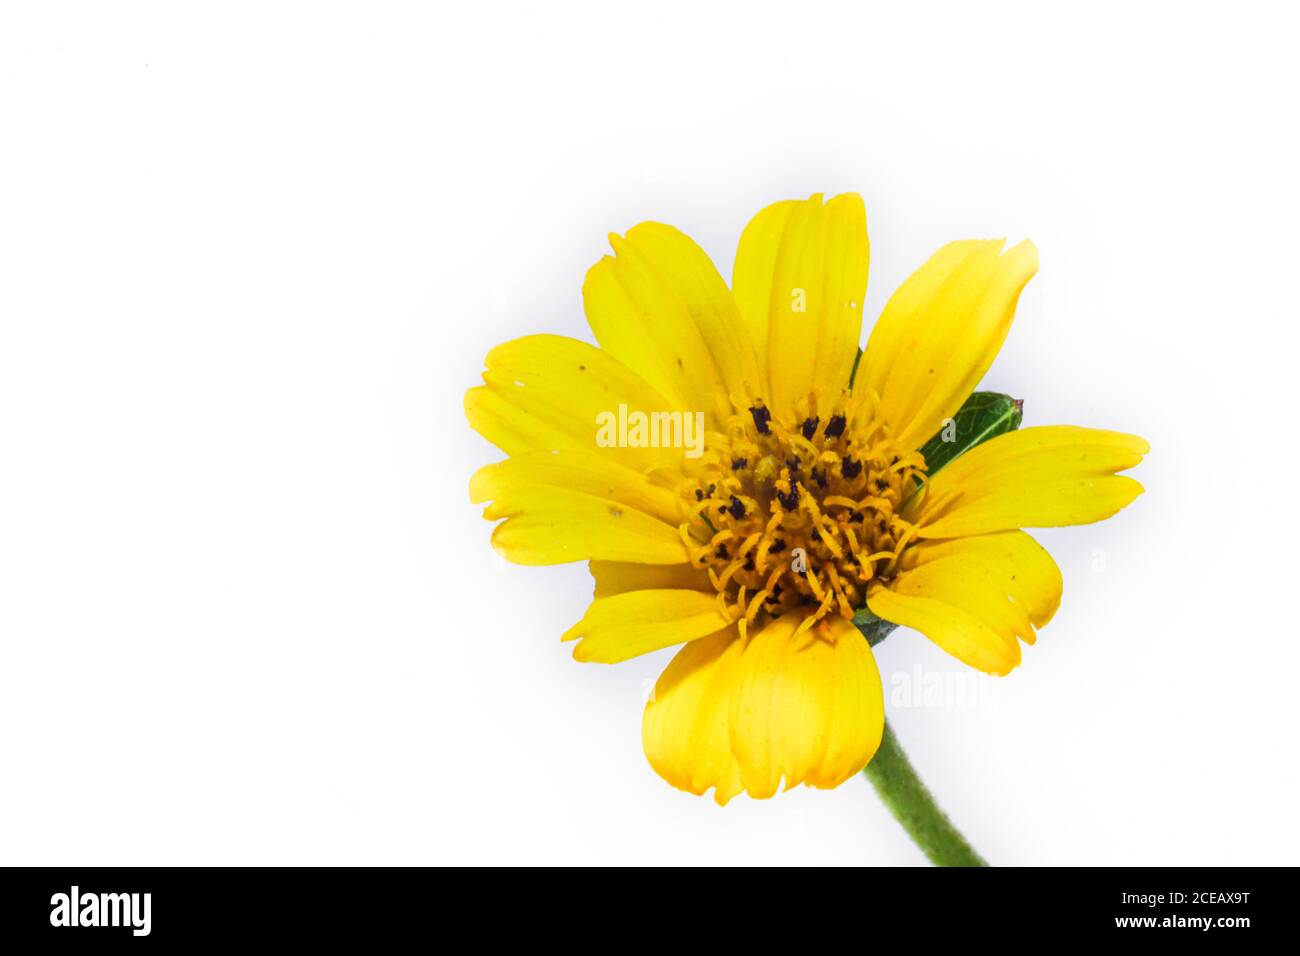 yellow wedelia flower isolated with white background Stock Photo